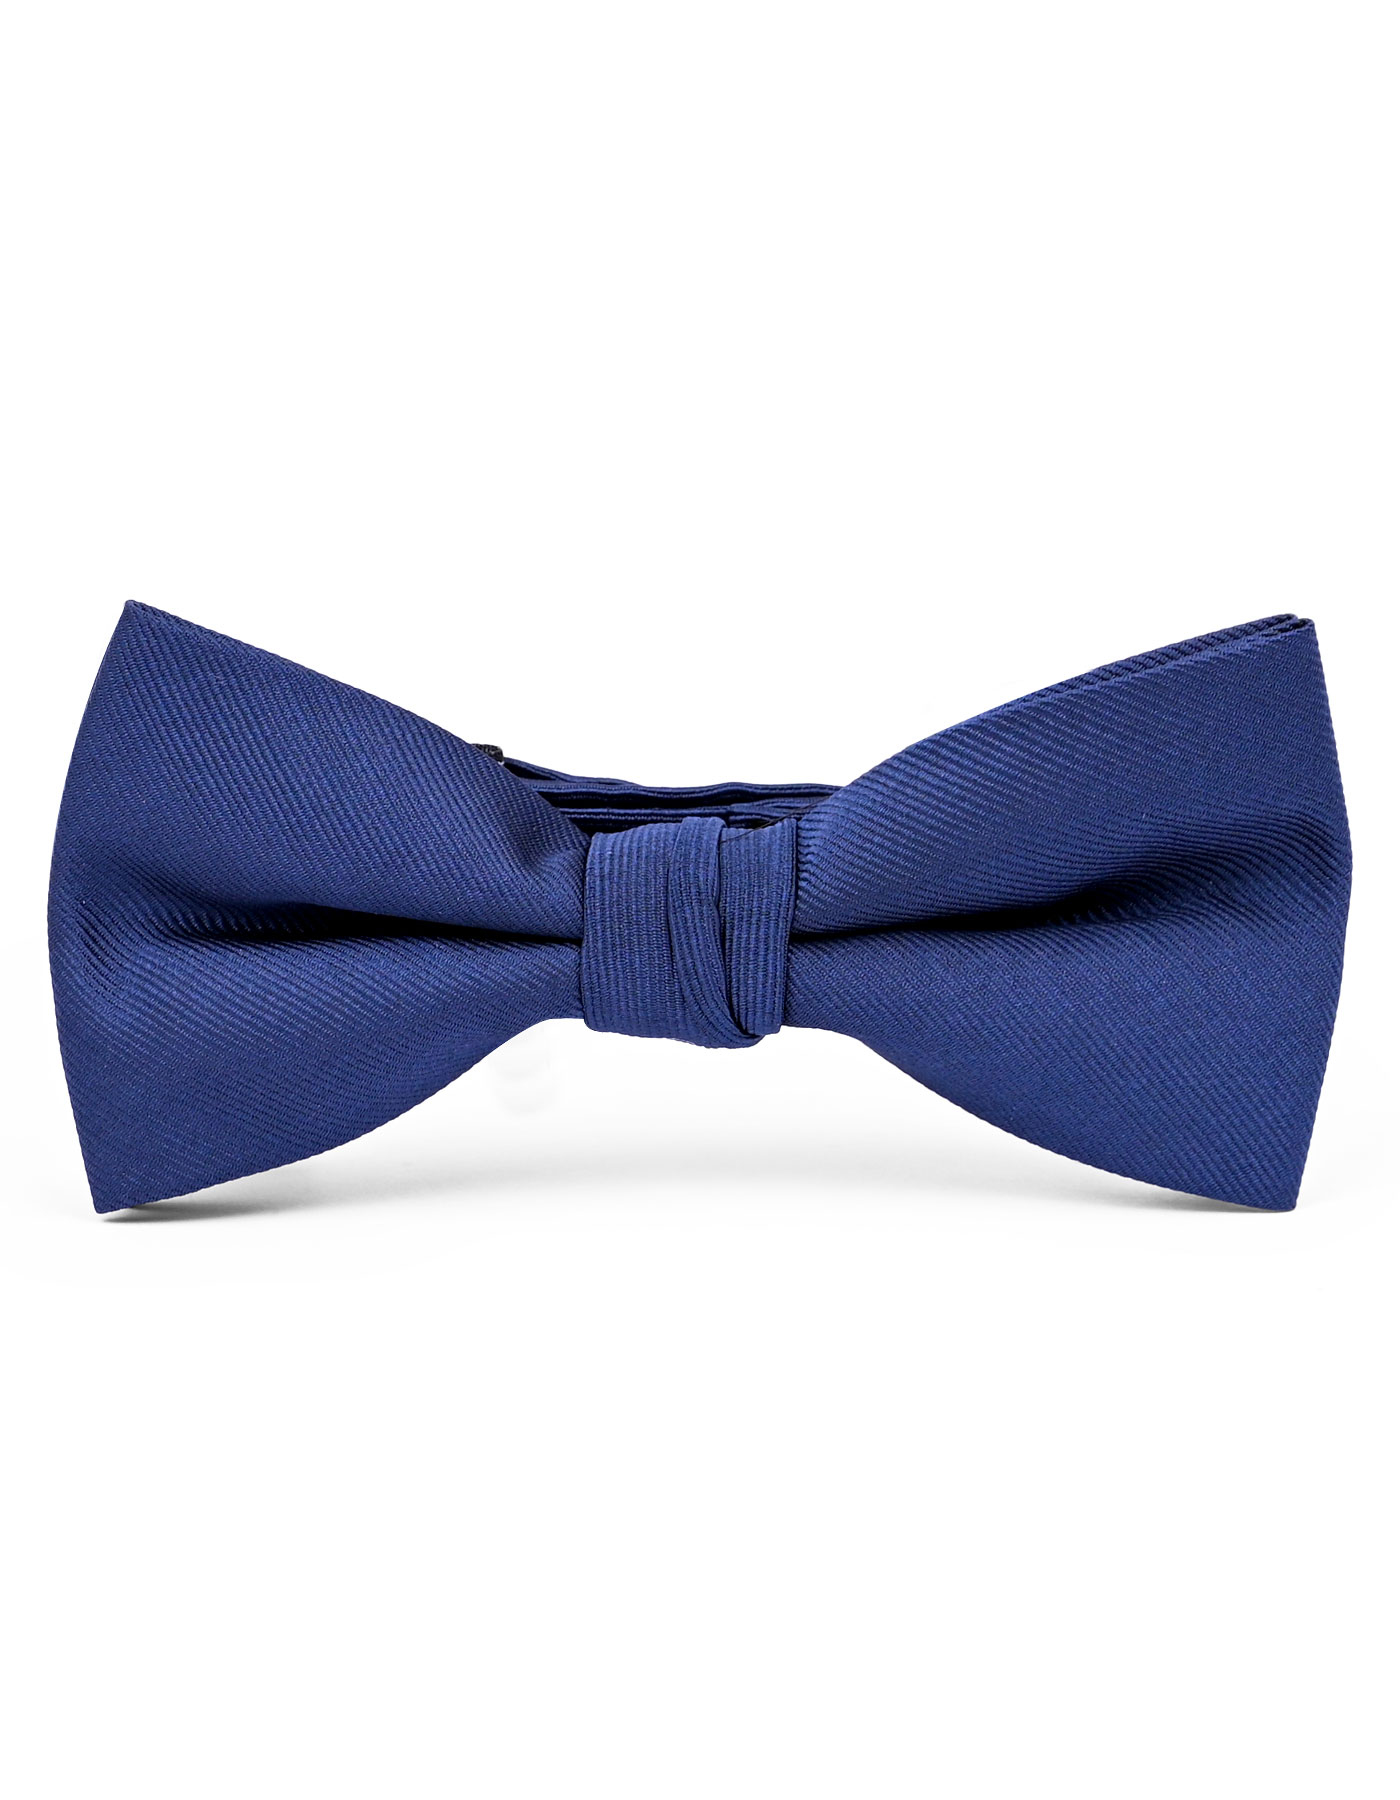 Bow Tie Collection Online shopping in Pakistan